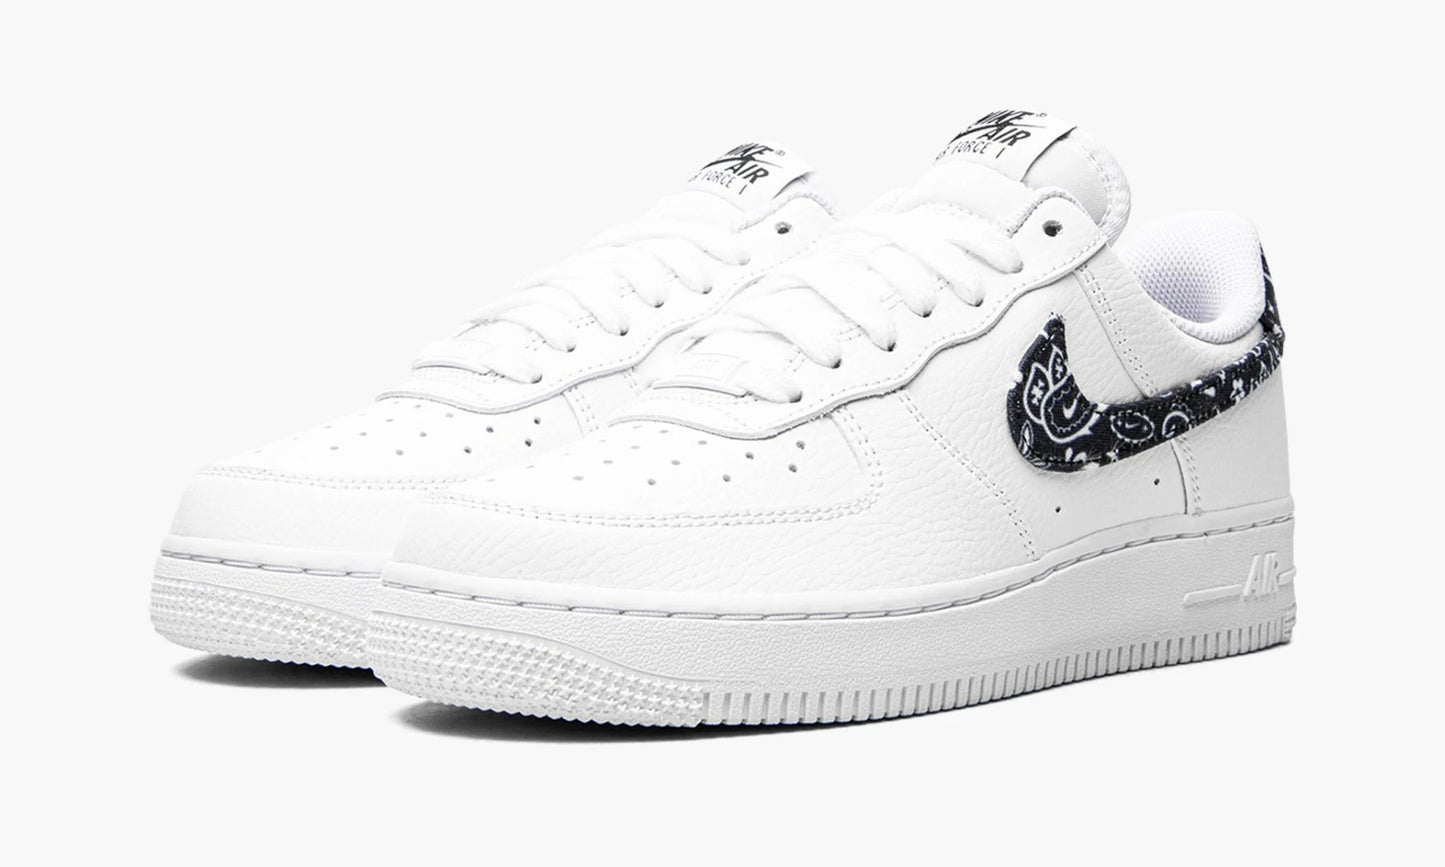 Air Force 1 Low '07 Essential WMNS White Black Paisley - DH4406 101